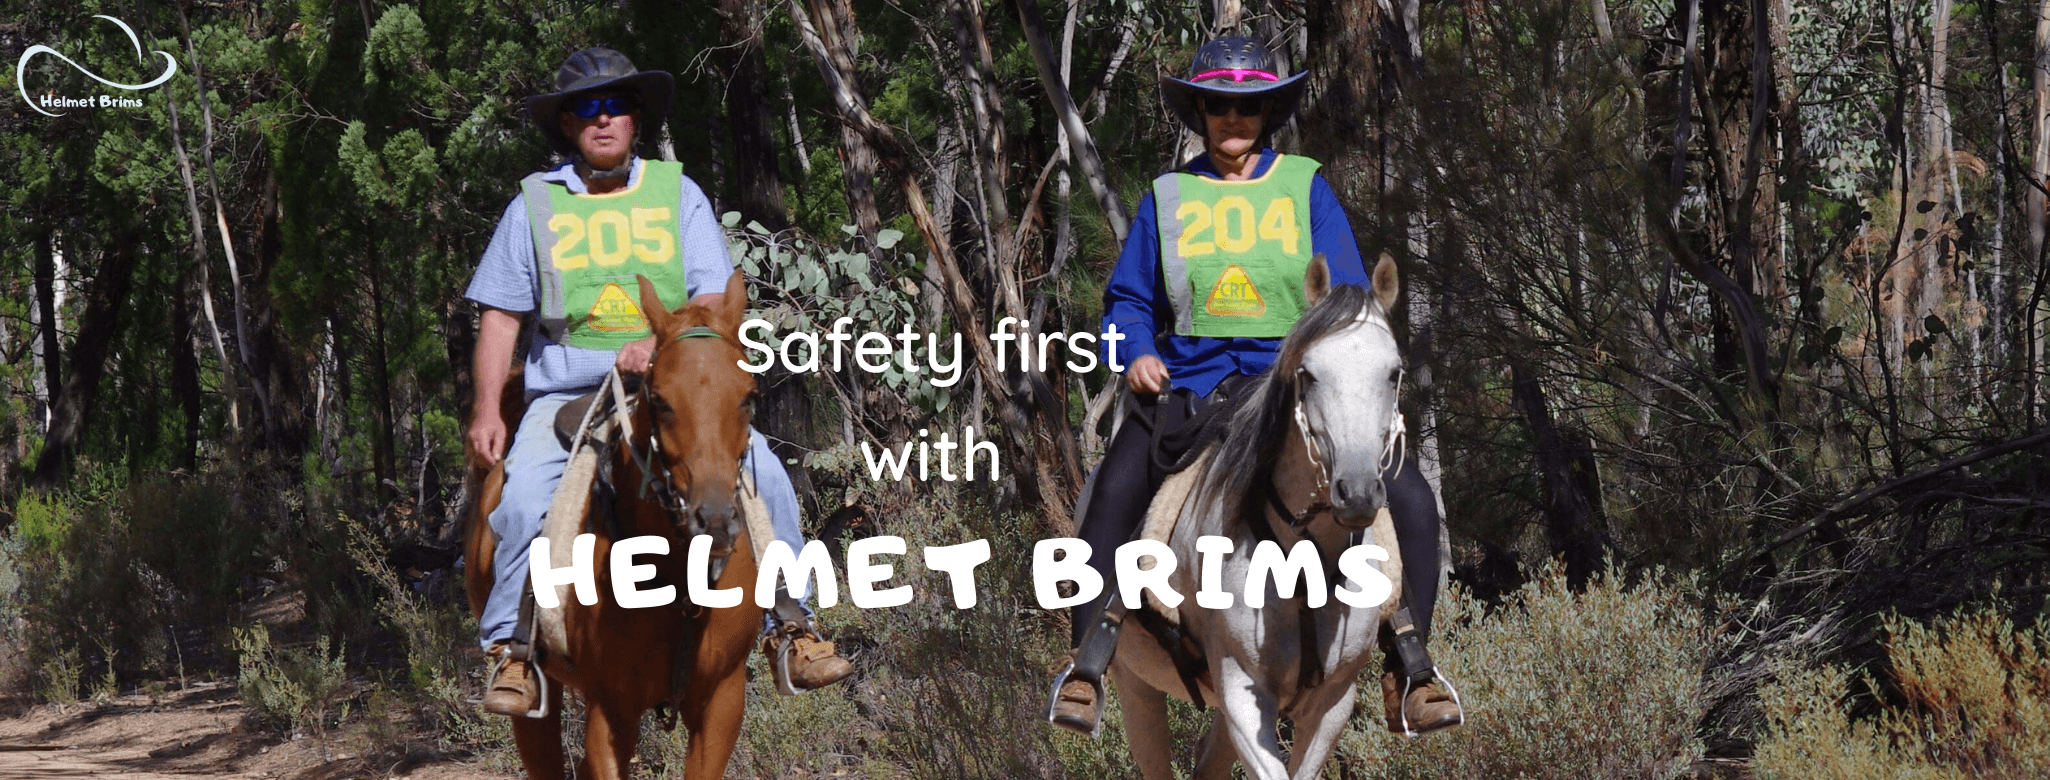 which horse riding helmet is safest?